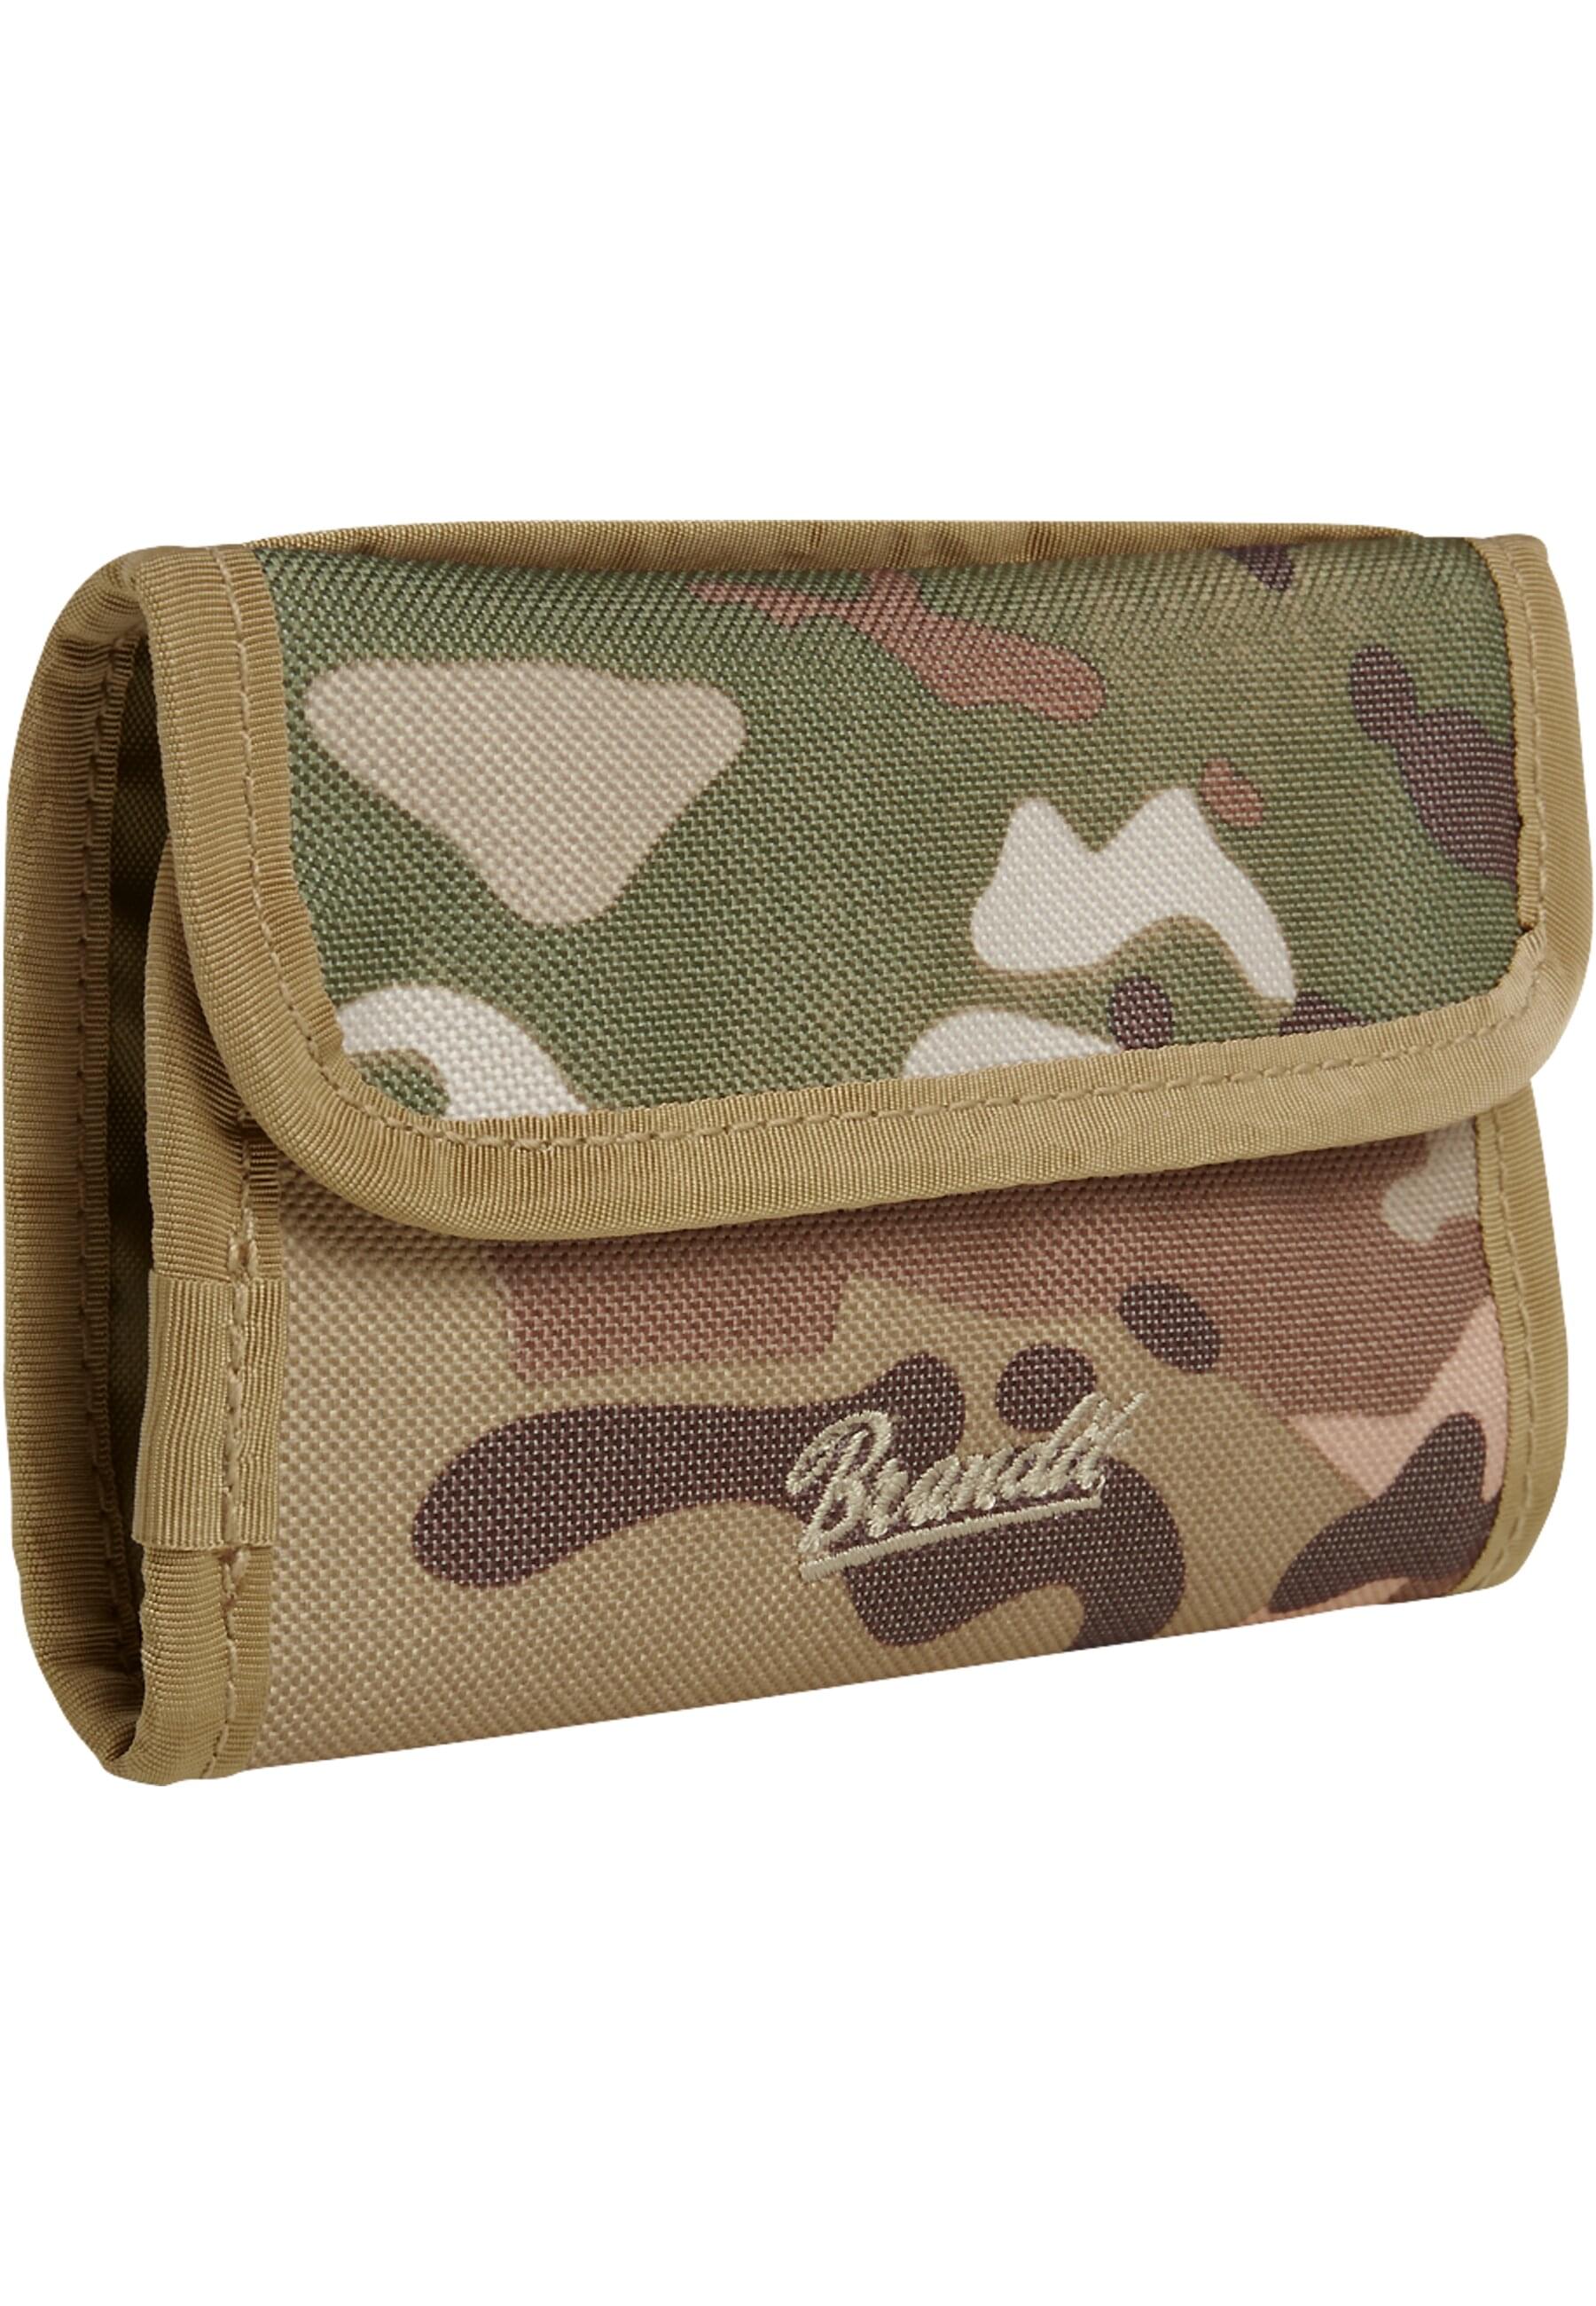 Кошелек Brandit Brieftaschen, цвет tactical camo tactical raiders mc scorpion camouflage forre two point tactical strap